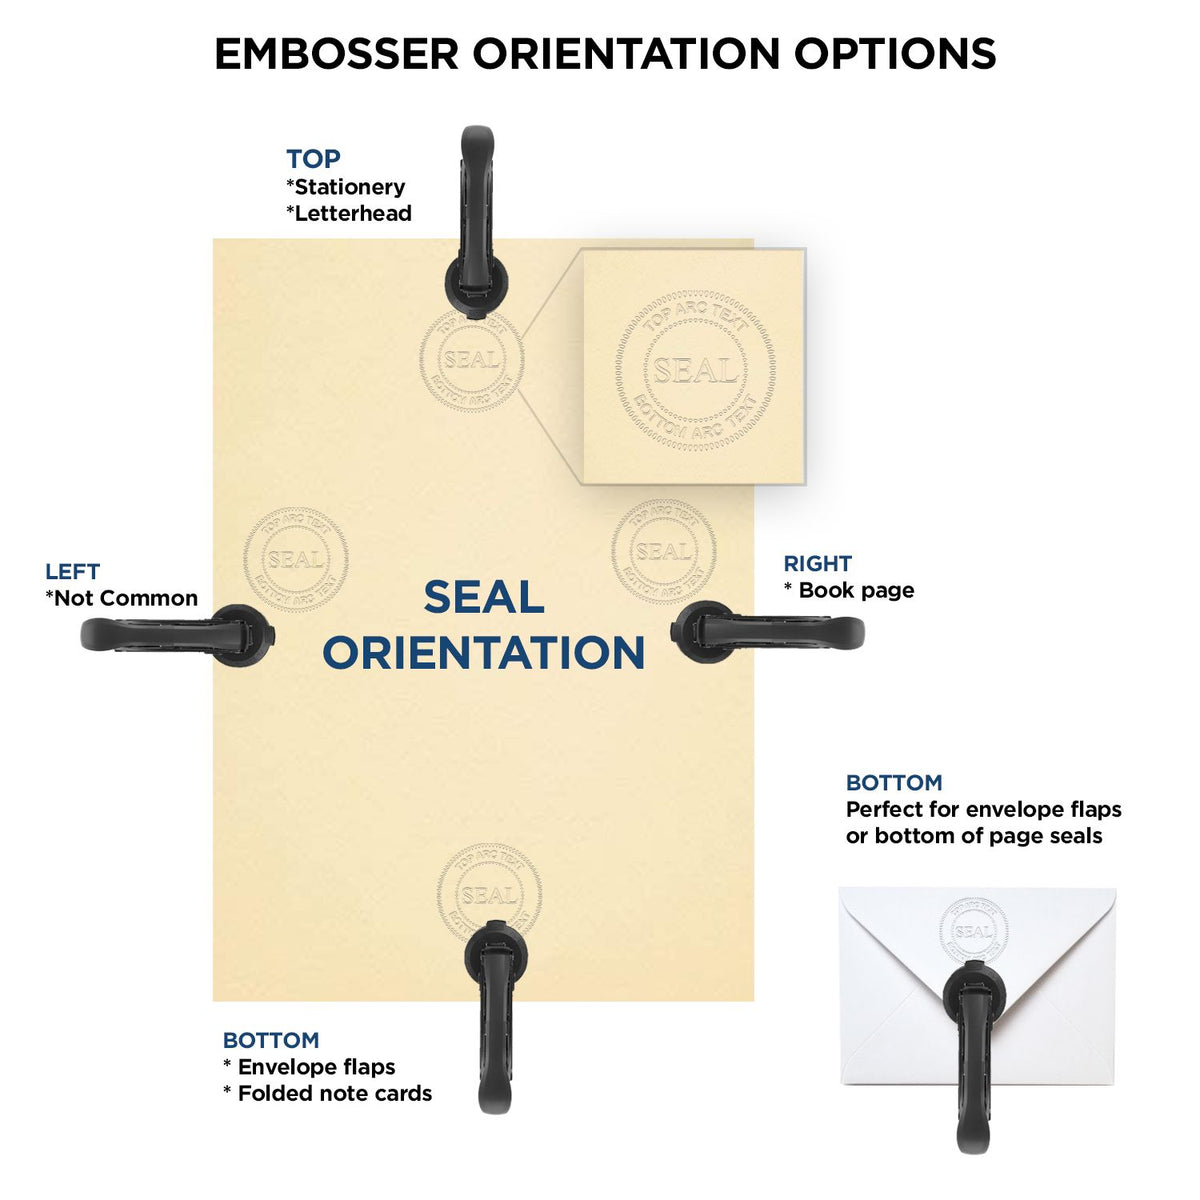 An infographic for the Hybrid Louisiana Land Surveyor Seal showing embosser orientation, this is showing examples of a top, bottom, right and left insert.